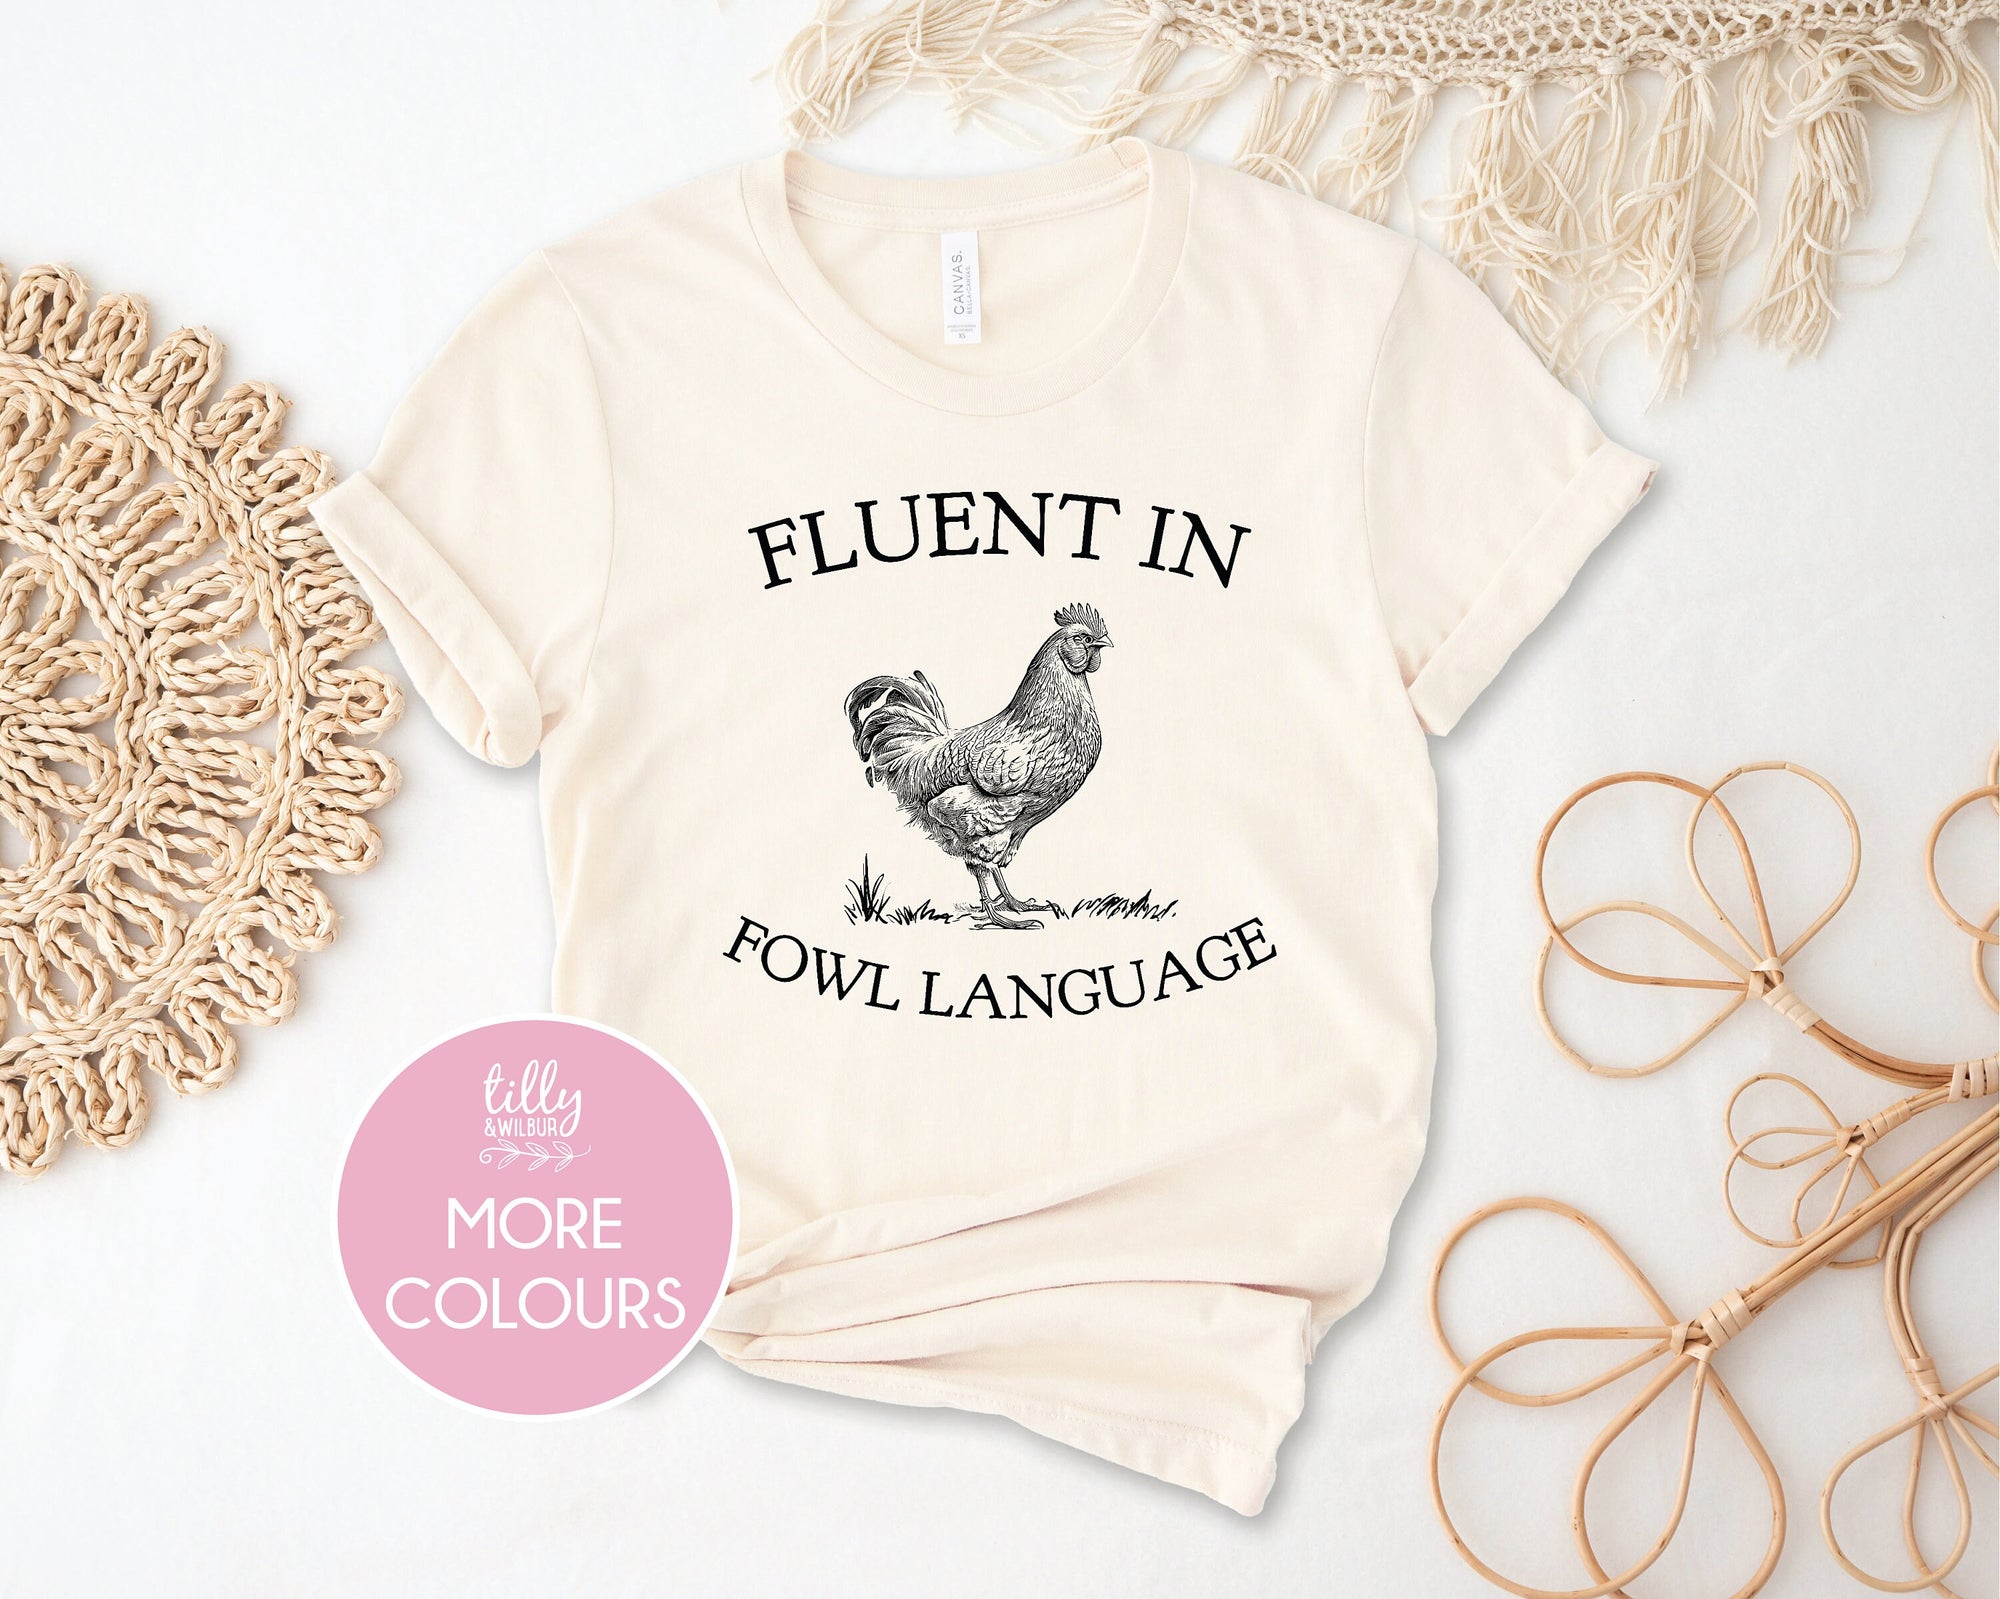 Fluent in Fowl Language T-Shirt, Funny Chicken T-Shirt, Sarcastic Quote, Chicken Mama T-Shirt, Chicken T-Shirt, Crazy Chicken Lady T-Shirt